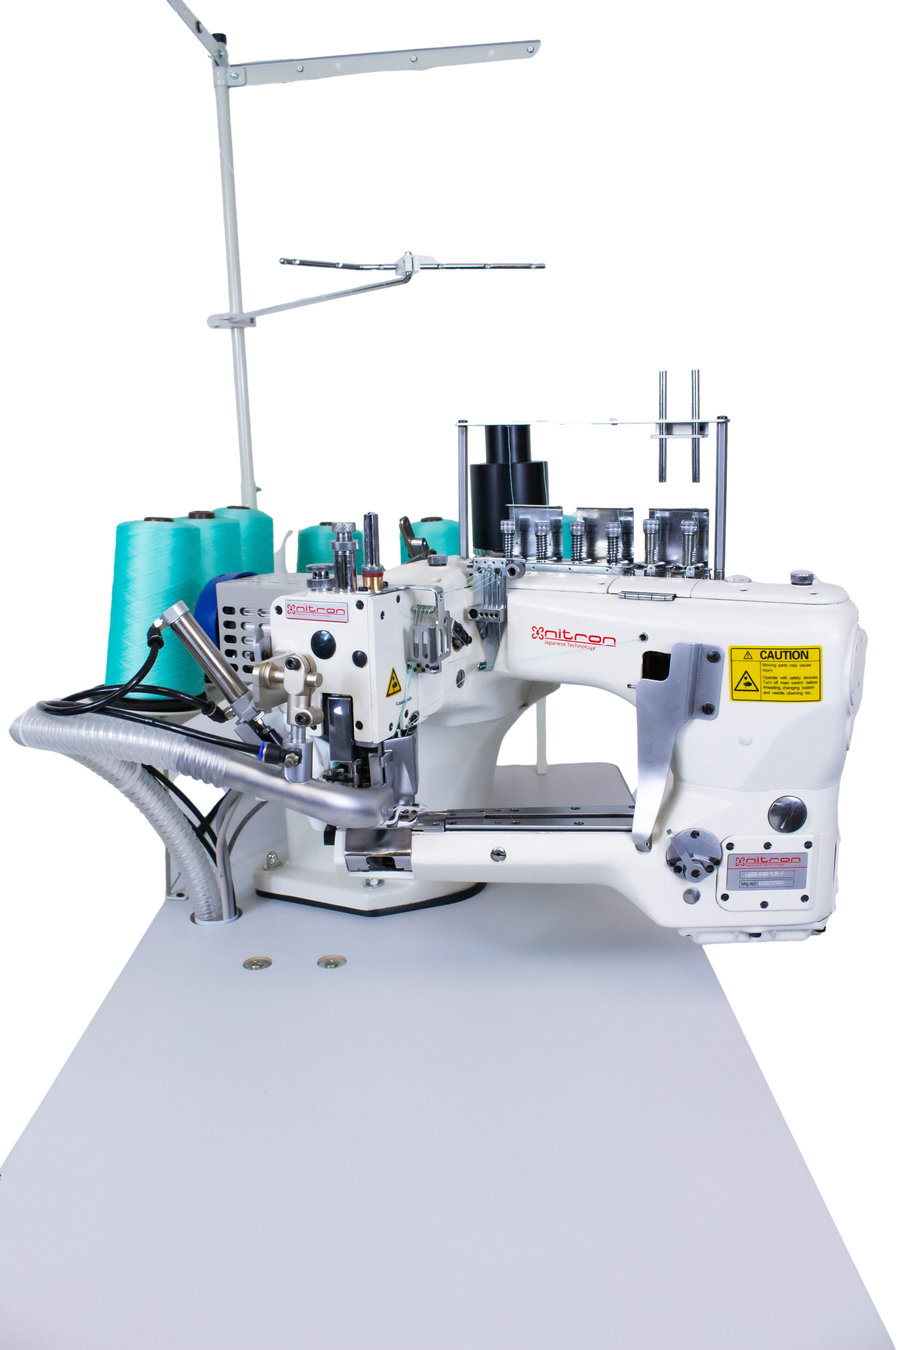 NT-6200-0 1ms-52d-7 FLAT LOCK INDUSTRIAL SEWING MACHINE (WITH CHAIN CUTTER)